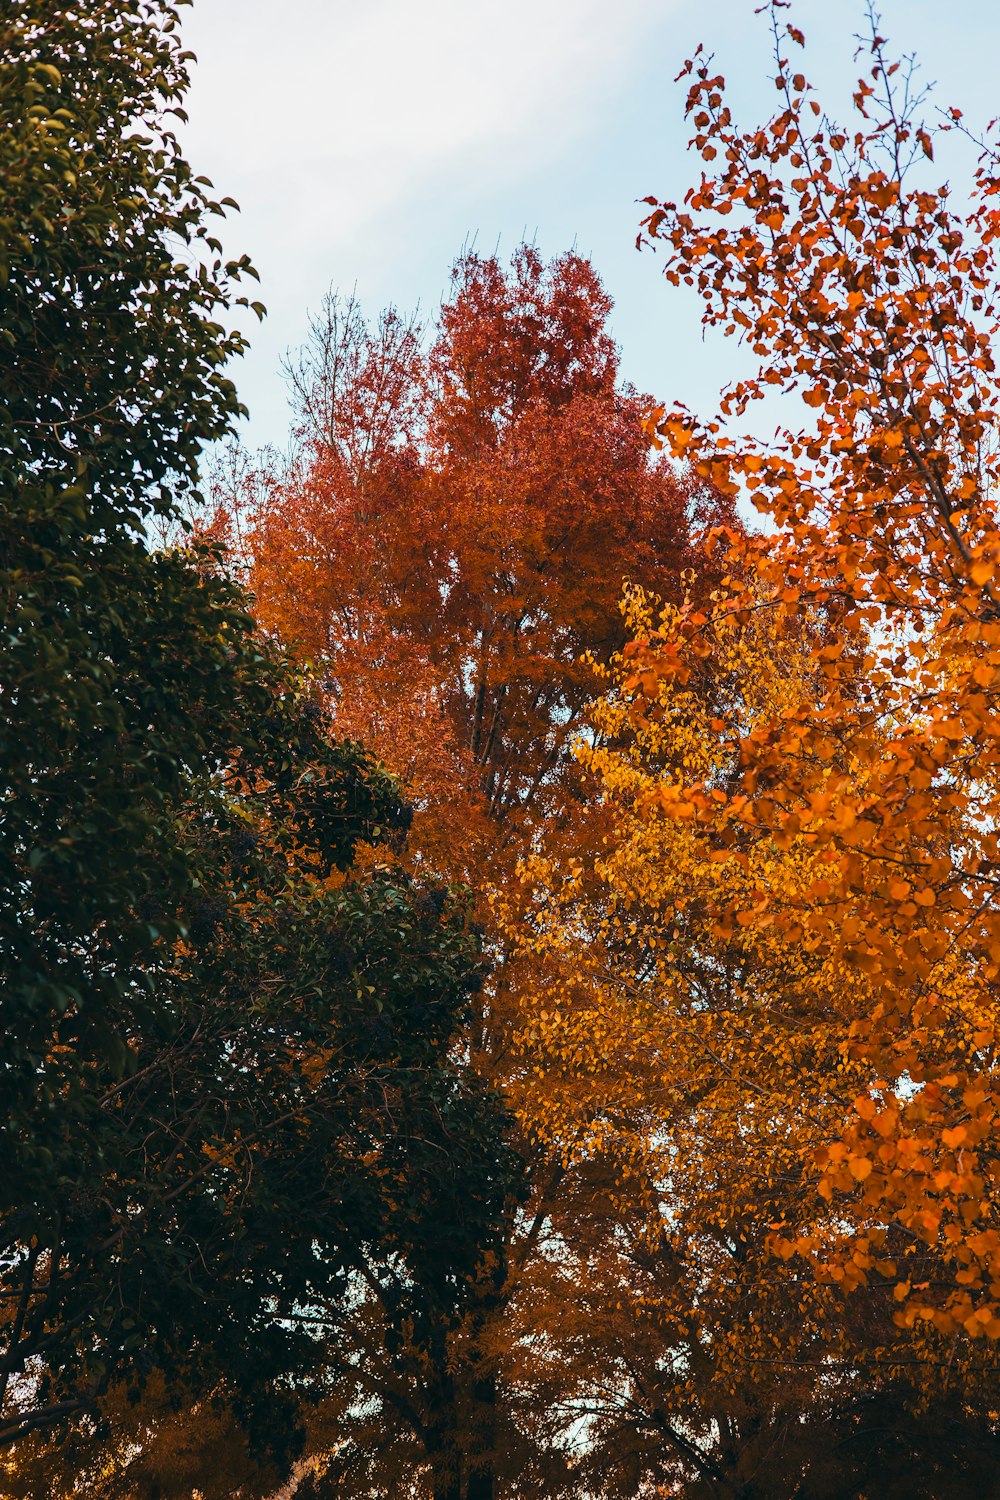 trees with orange and yellow leaves in a park